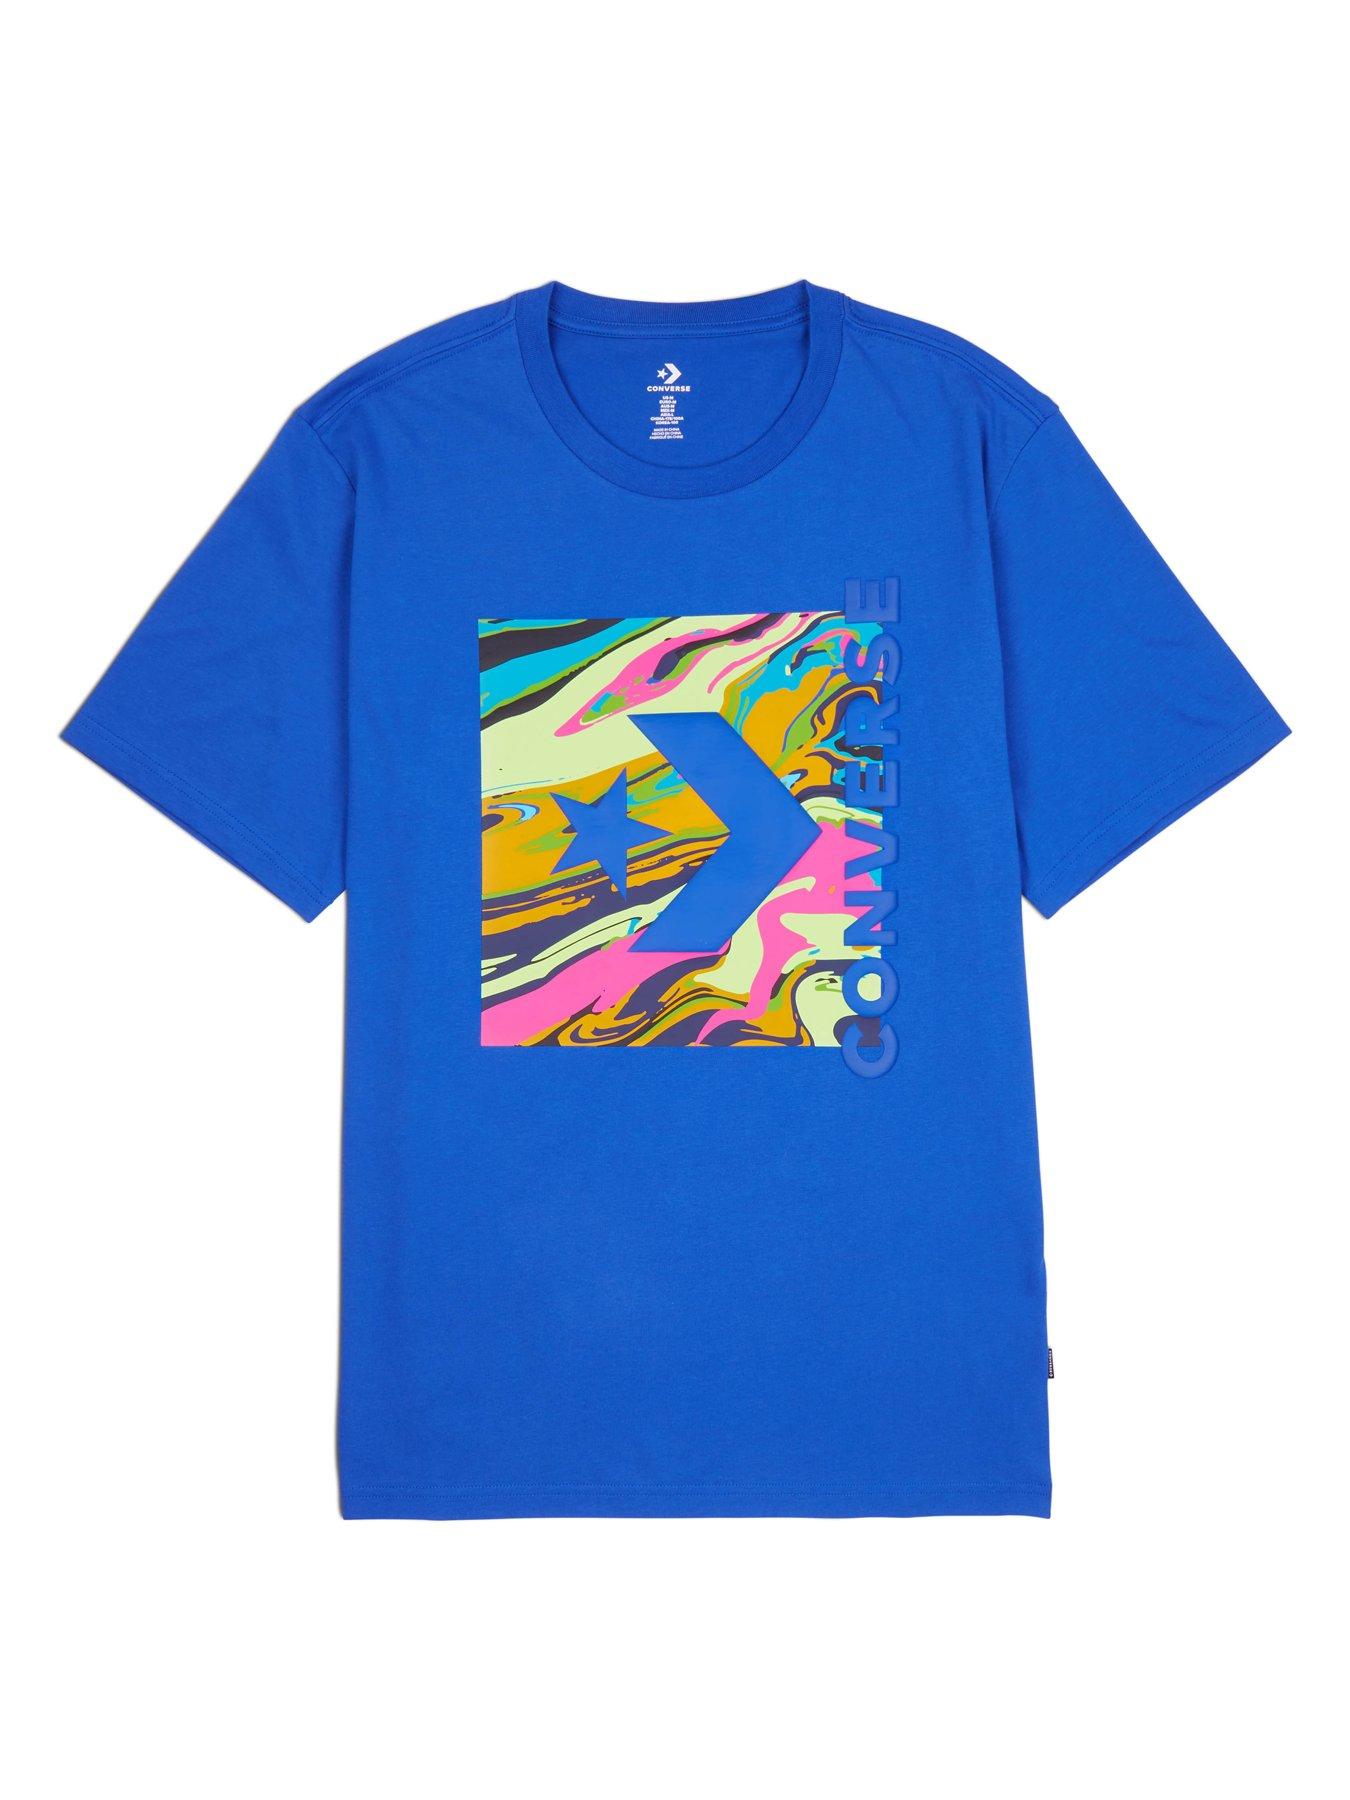 Converse Star Chevron '90s Marbled Graphic T-Shirt - Blue/Multi | very ...